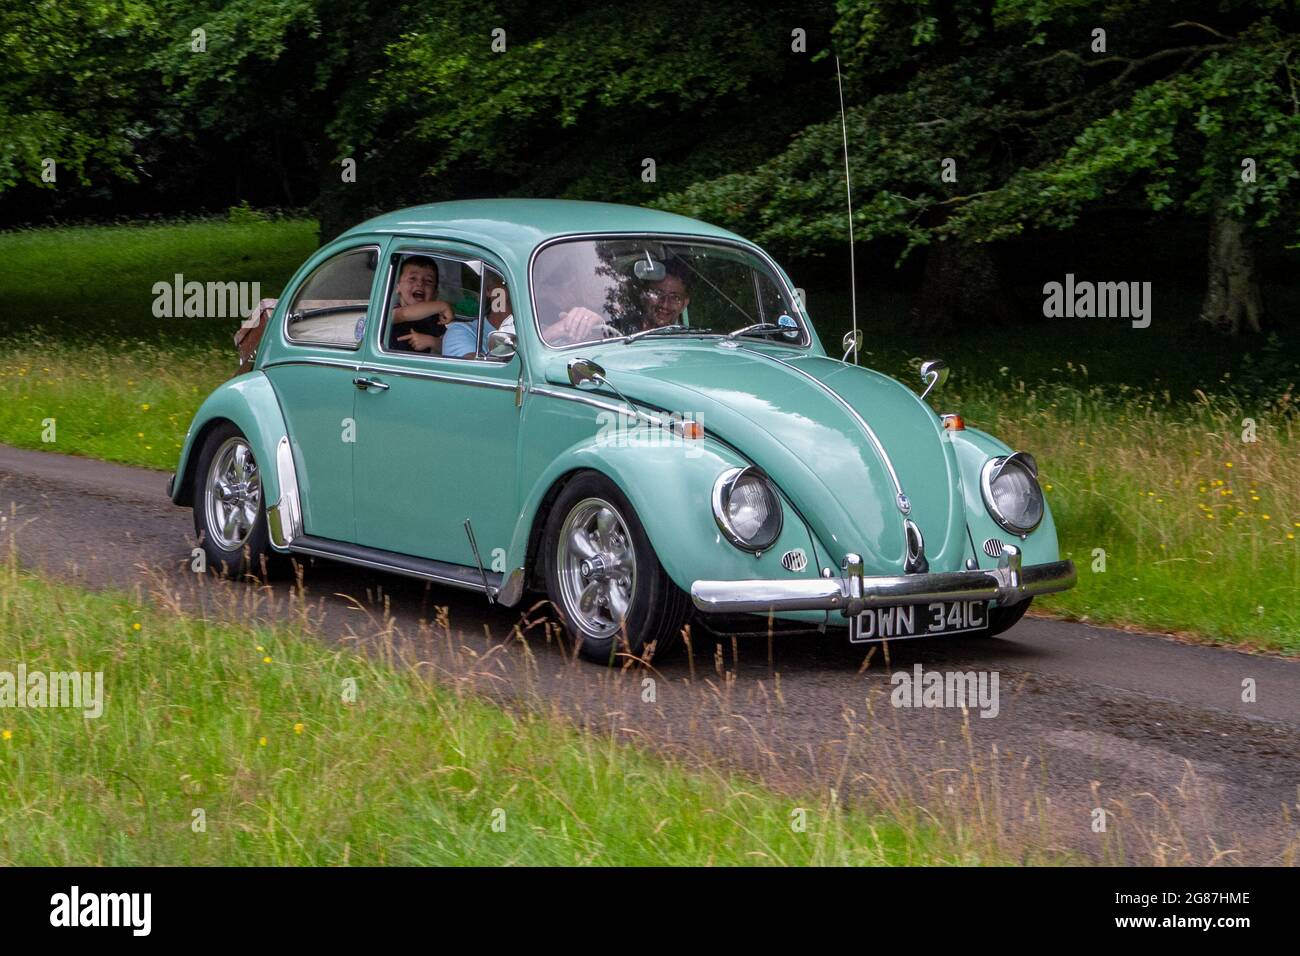 A 1965 60s green classic vintage Volkswagen Beetle 1200 Car at ‘The Cars the Star Show” in Holker Hall & Gardens, Grange-over-Sands, UK Stock Photo